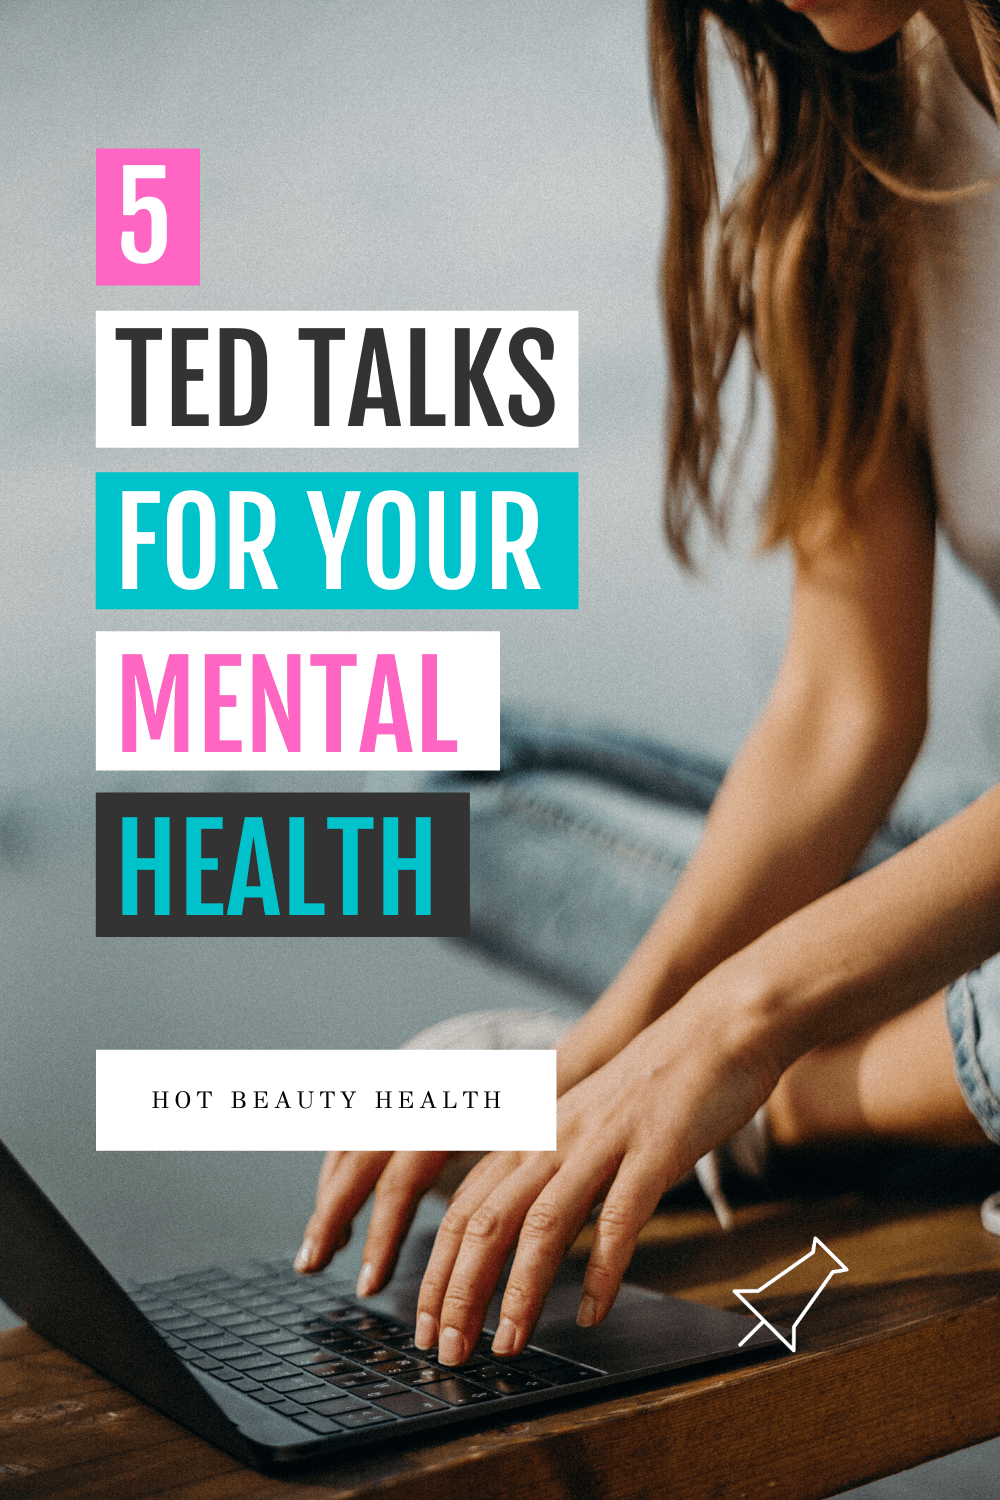 The Best TED Talks to Help You Deal with Stress